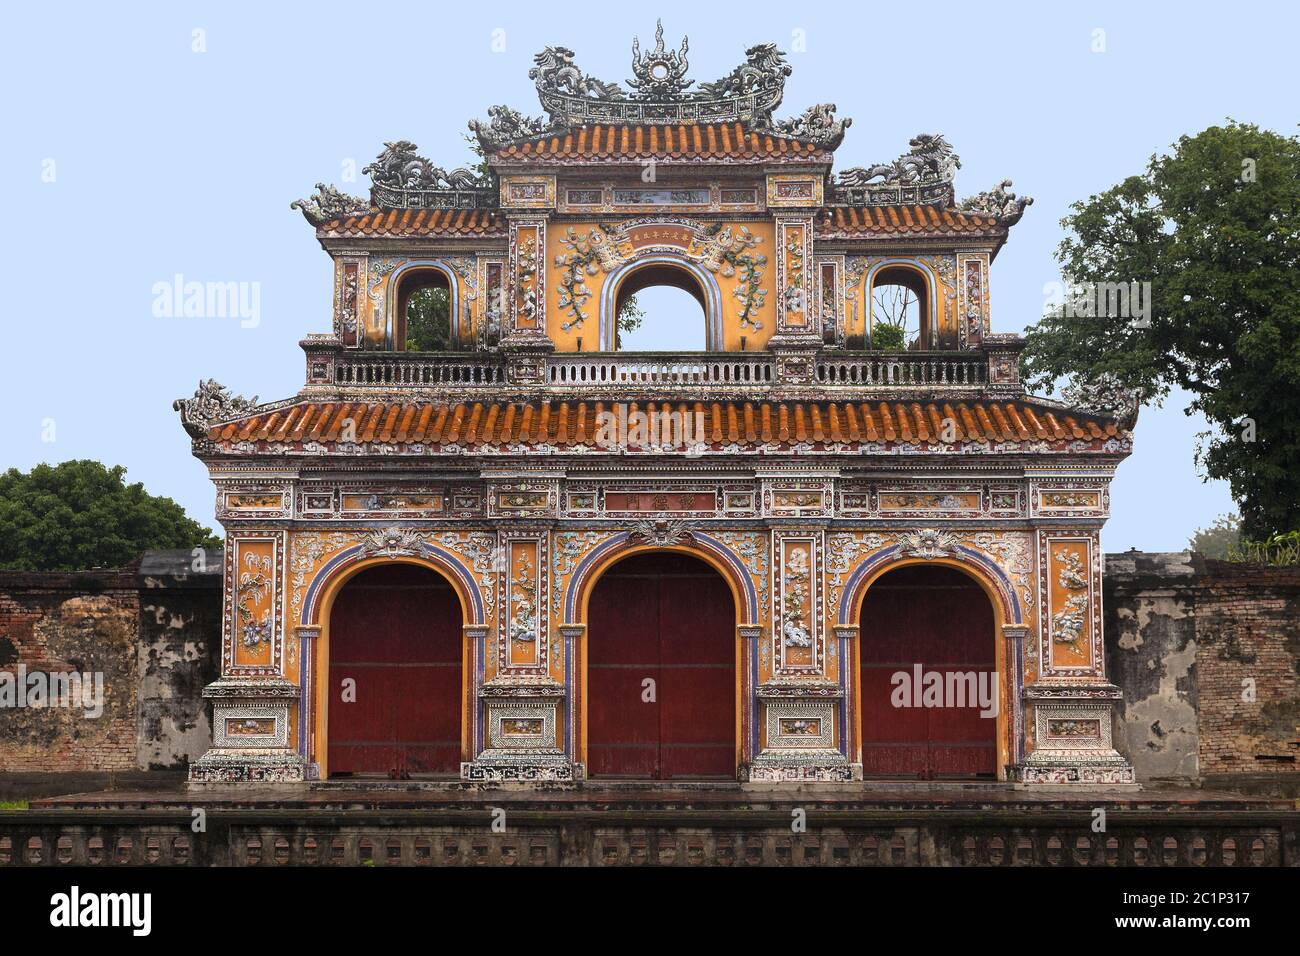 The Gate to the Citadel of the Imperial City in Hue, Vietnam Stock Photo